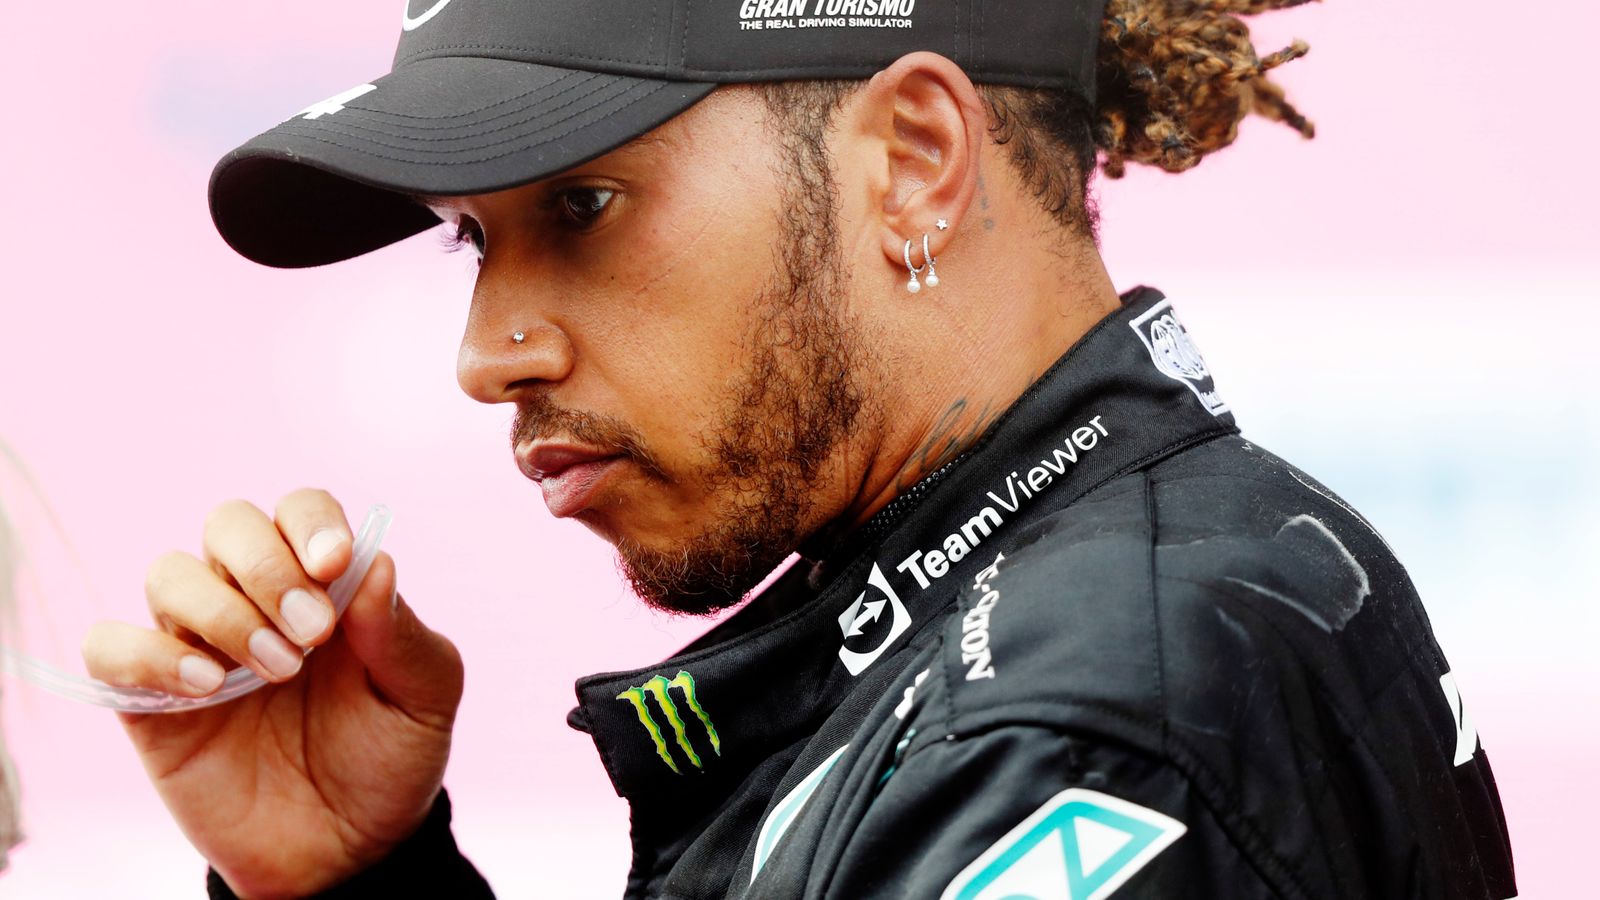 Lewis Hamilton S Contract Won T Be His Last Mercedes In A New F1 Deal And Who Could Be A Teammate In 2022 Insider Voice